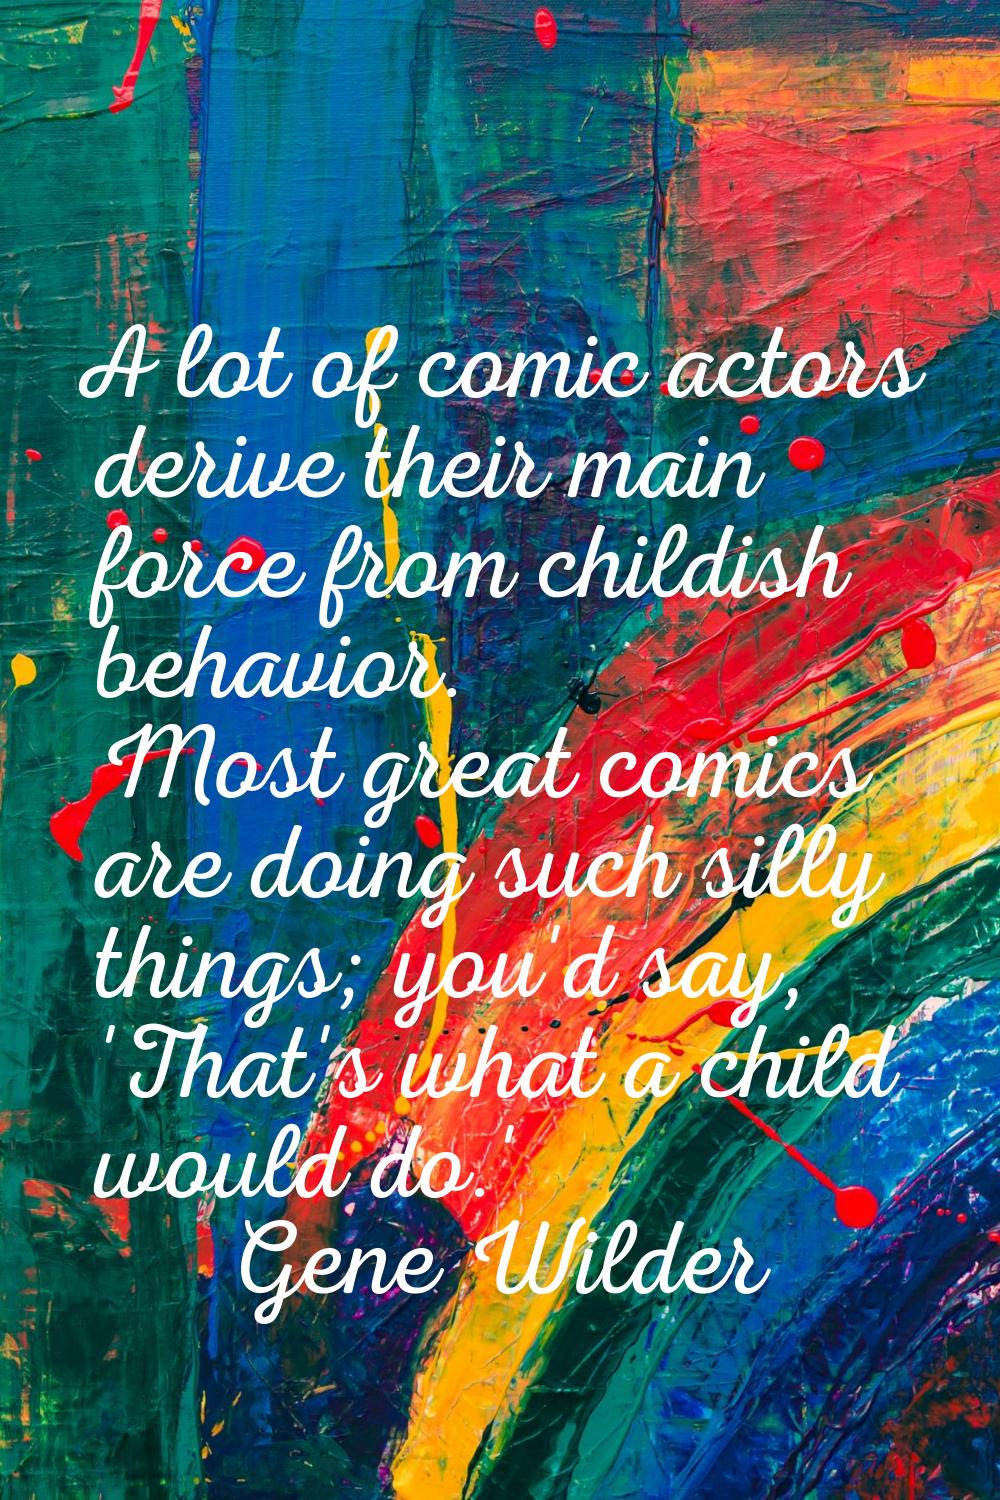 A lot of comic actors derive their main force from childish behavior. Most great comics are doing s